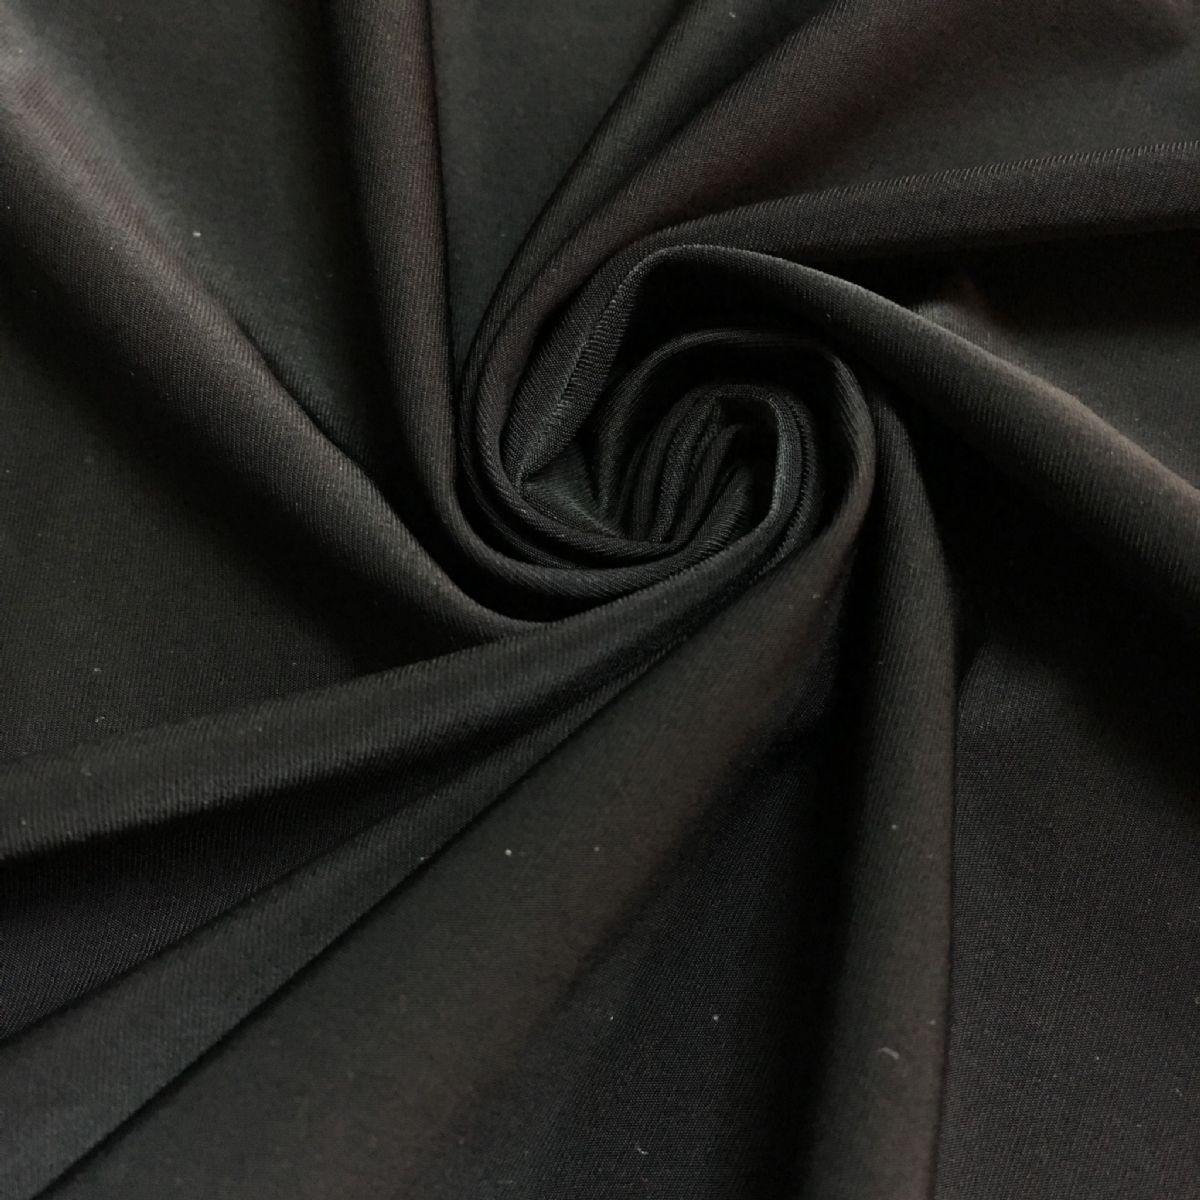 Black Stretch Nylon Spandex Fabric - Soft, Gorgeous, Sold by the